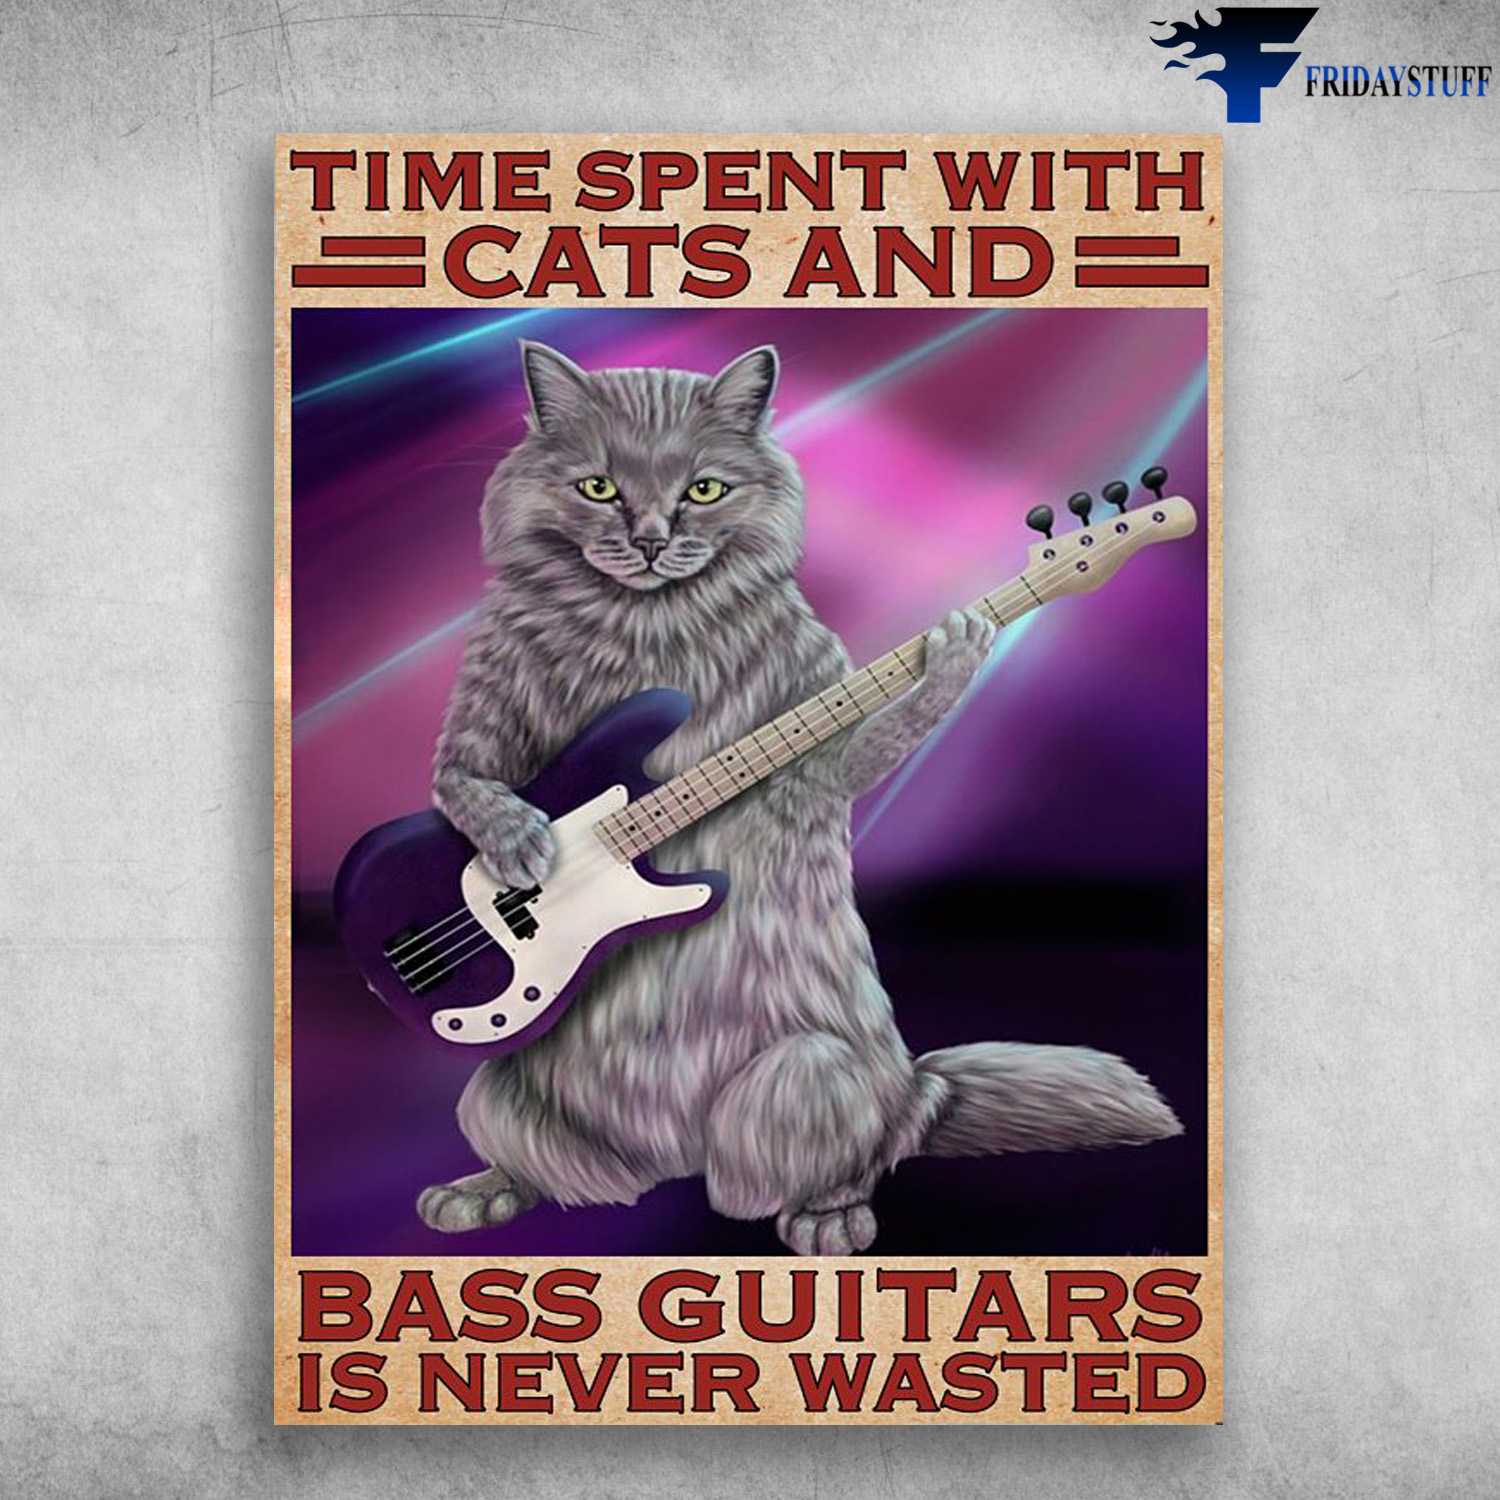 Guitar Cat, Cat Lover, Guitar Poster, Time Spent With Cats And Bass Guitars, Is Never Wasted